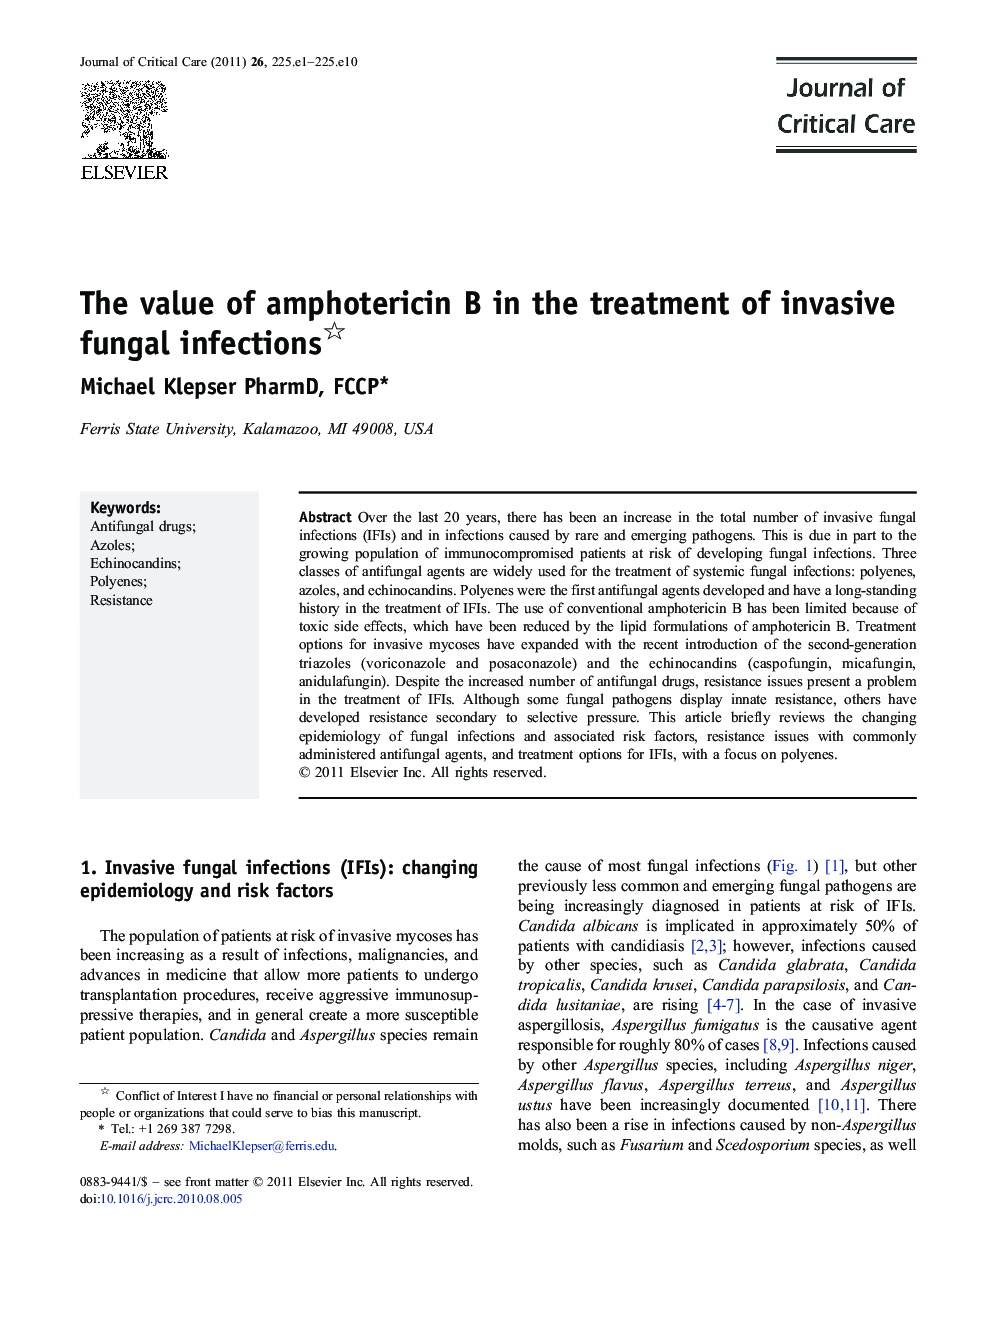 The value of amphotericin B in the treatment of invasive fungal infections